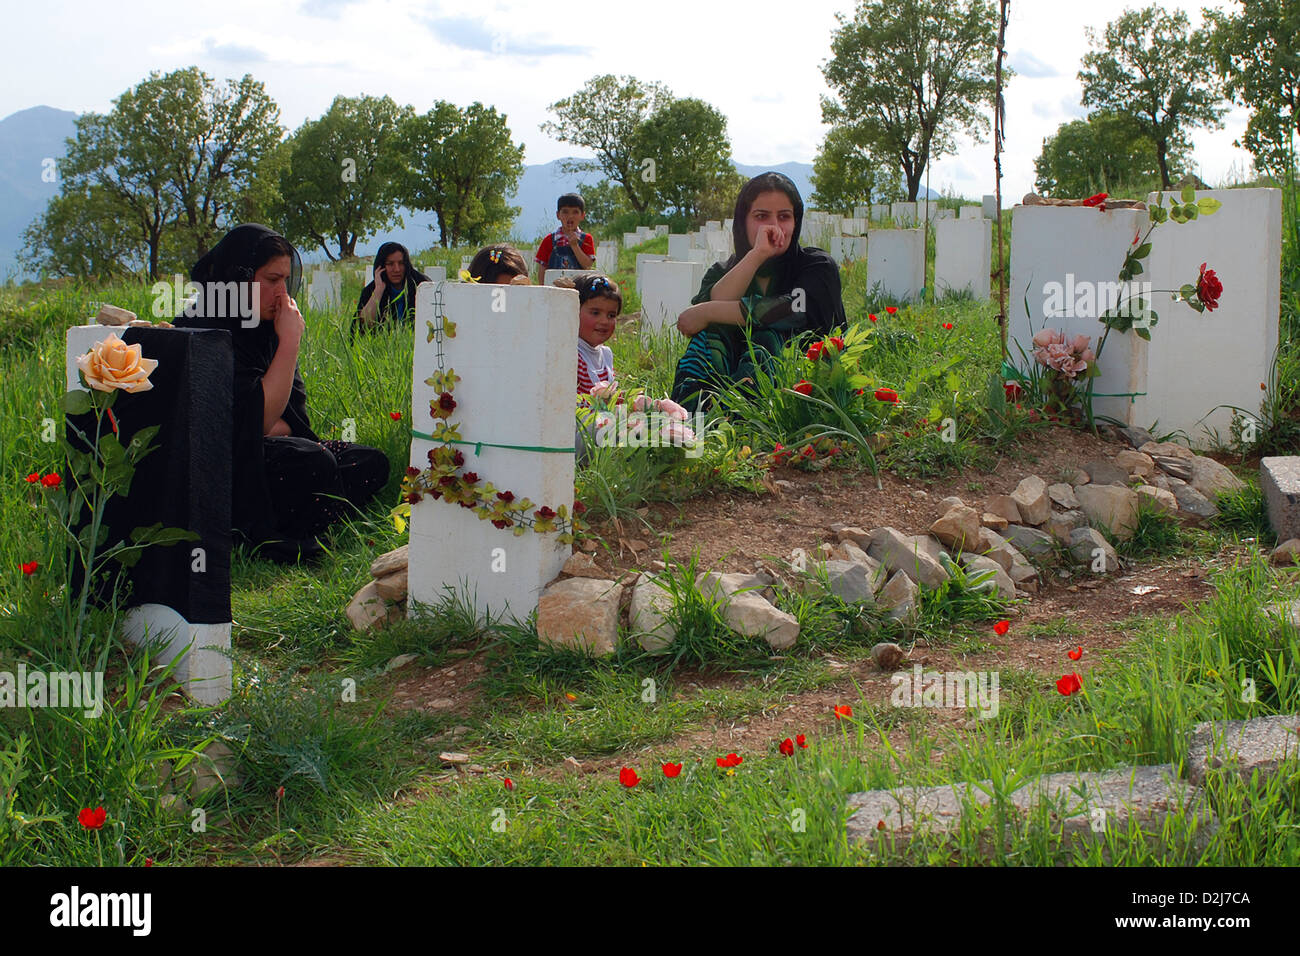 Kurdish women and children visit the grave site of a loved one in a cemetery where approximately 500 Kurdish men and boys who were killed during the early years of Saddam Hussein's regime have been relocated. The remains were brought from the mass burial site near Bussia, Iraq, and given a proper burial where they are now in Barzan, Iraq. Stock Photo